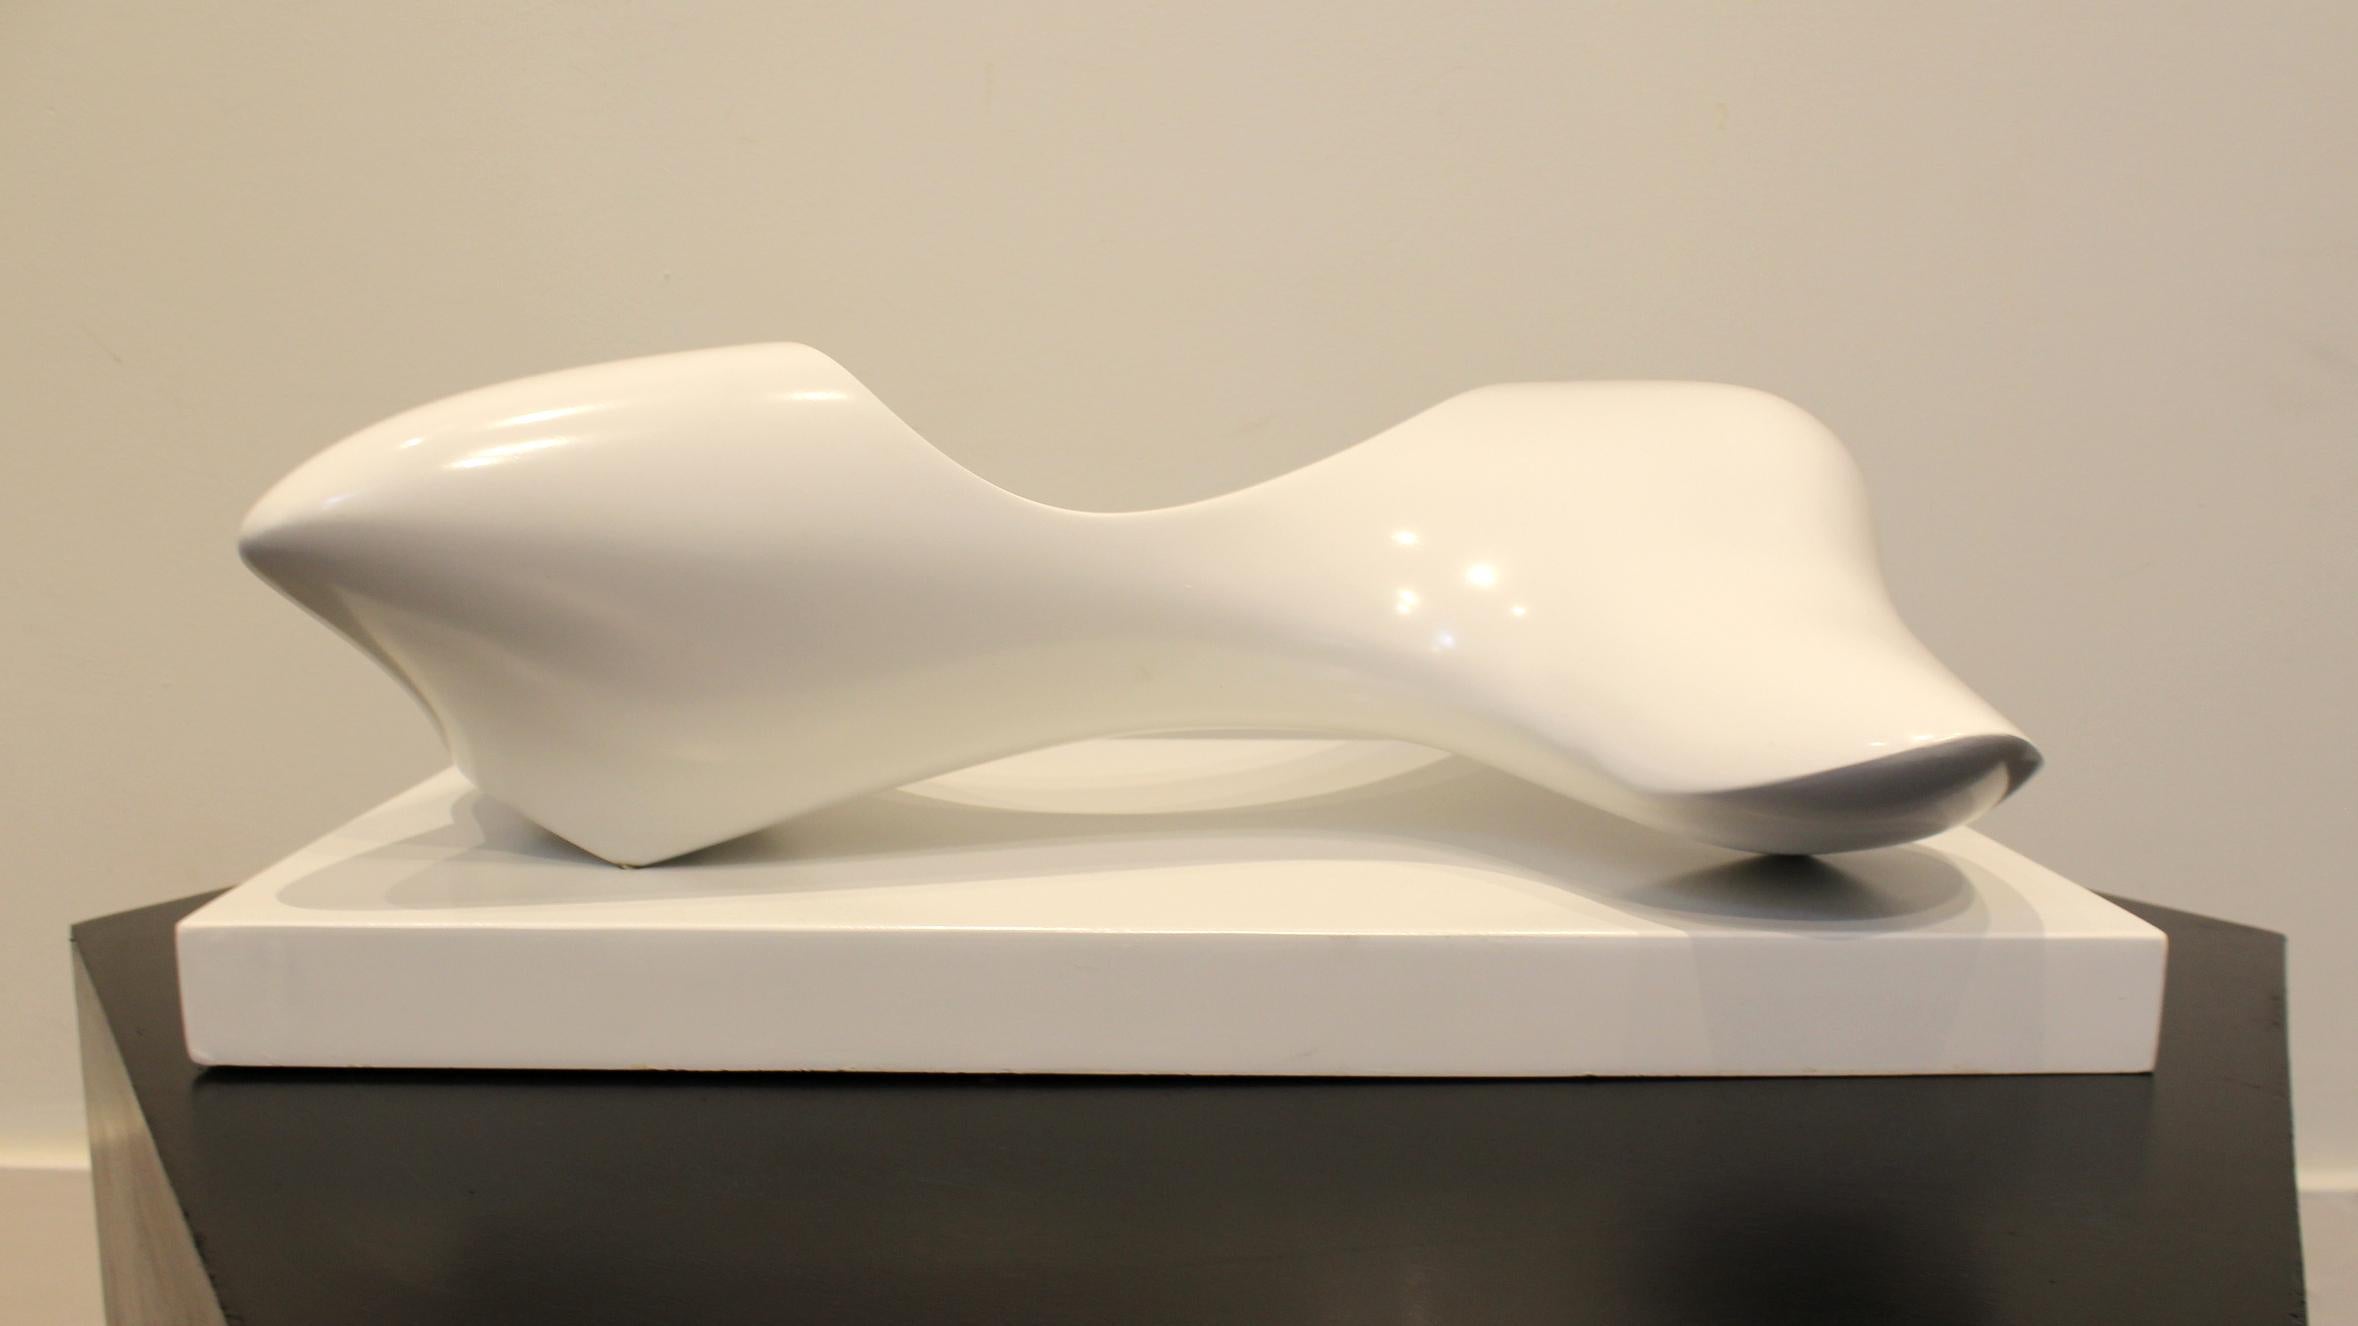 20th Century Mid-Century Modern Free-Form Sculpture by David Anderson